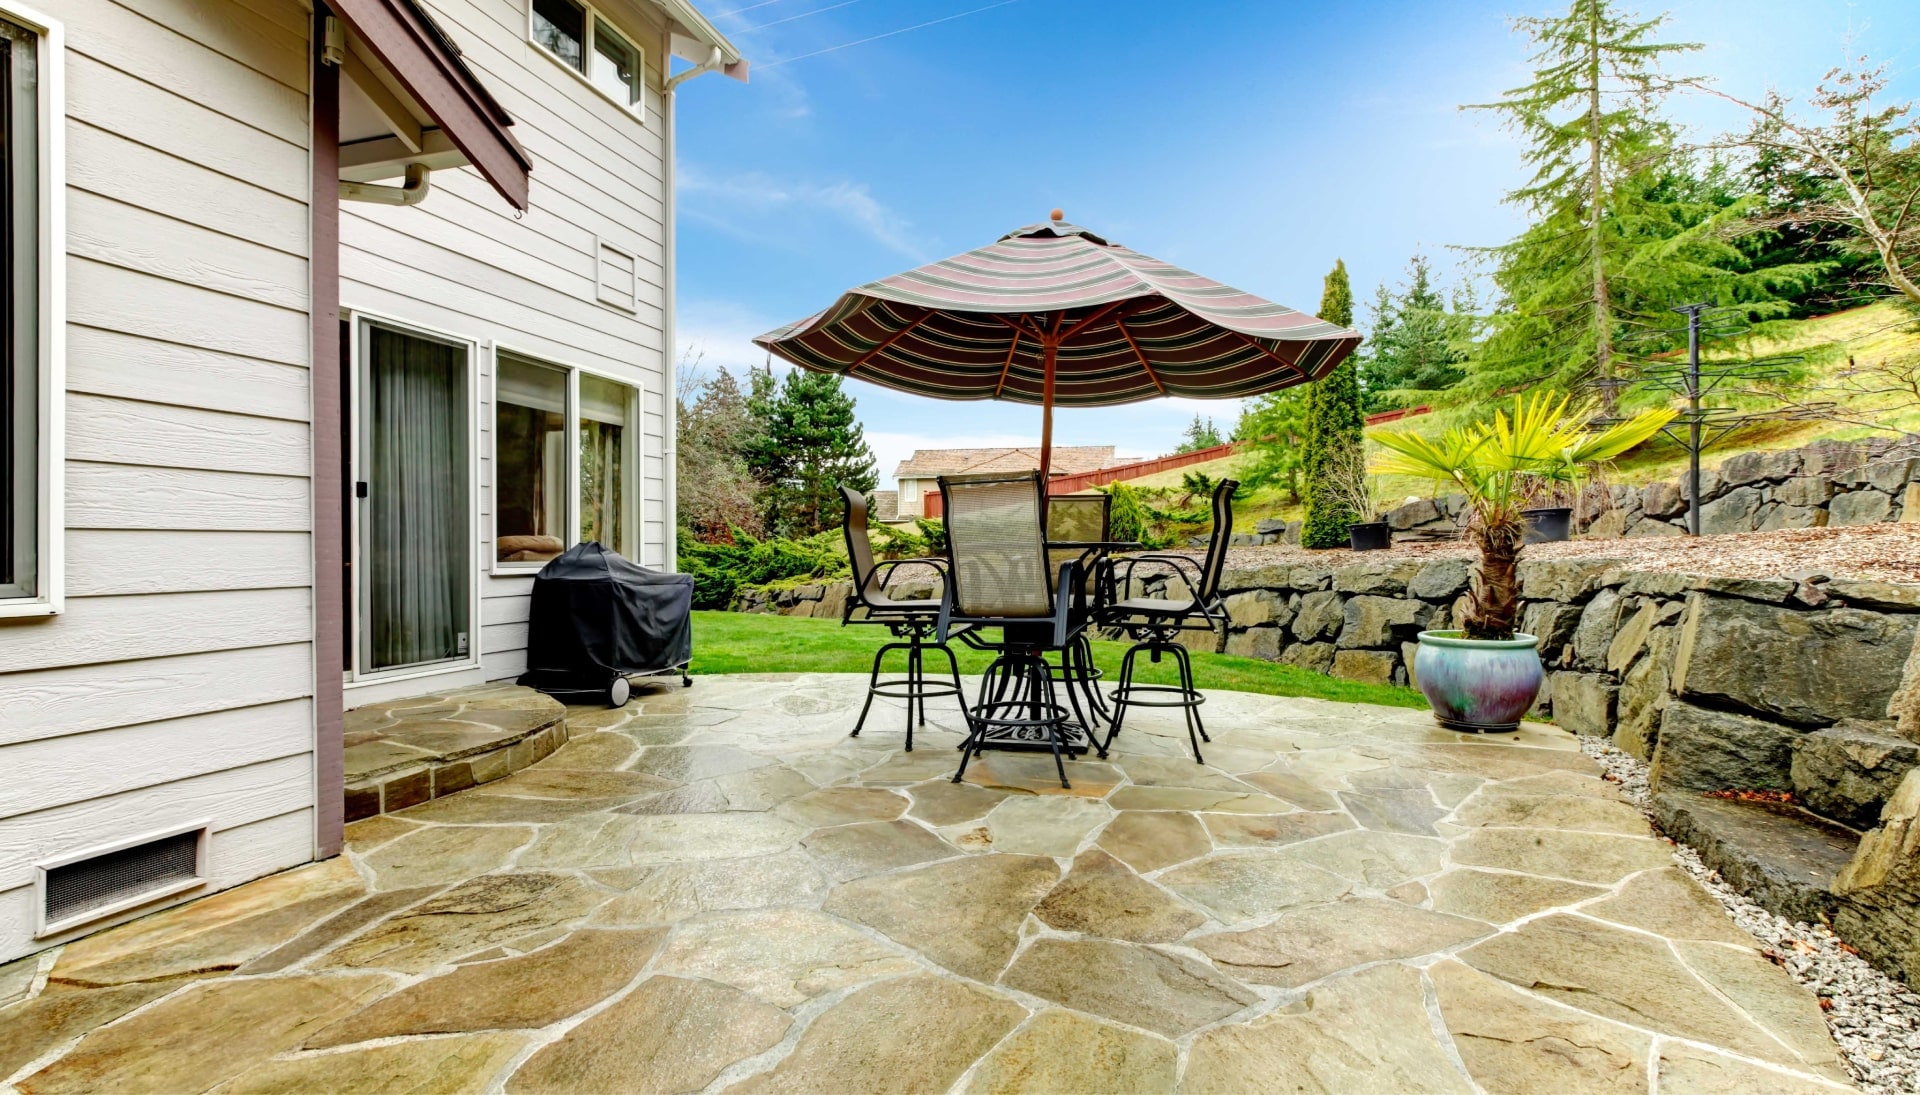 Beautifully Textured and Patterned Concrete Patios in Livermore, California area!